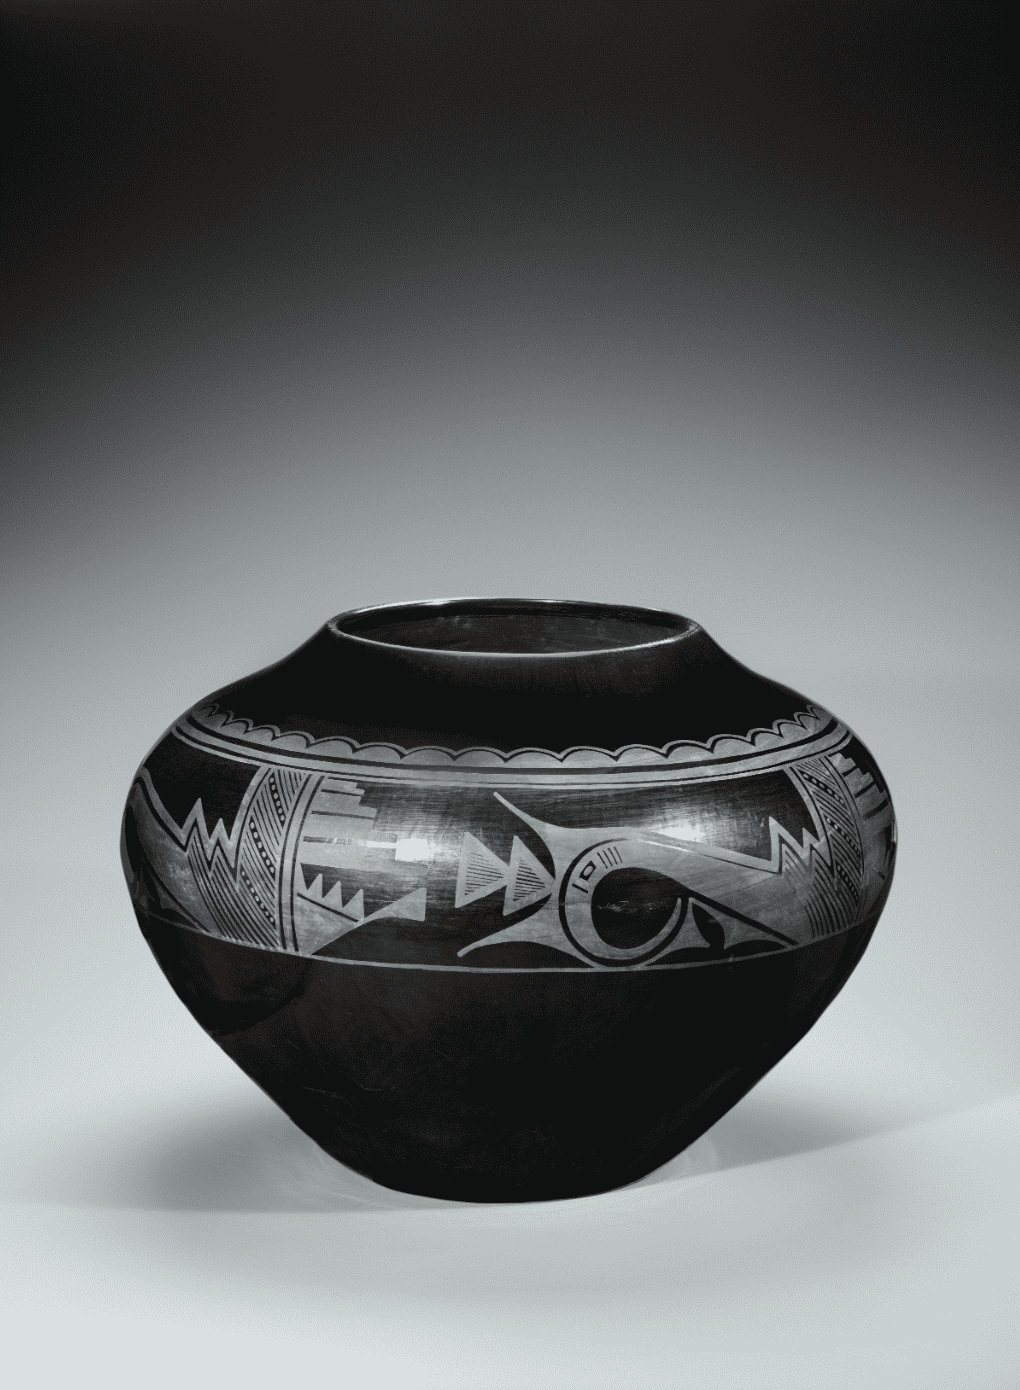 A black and white vase with designs on it.